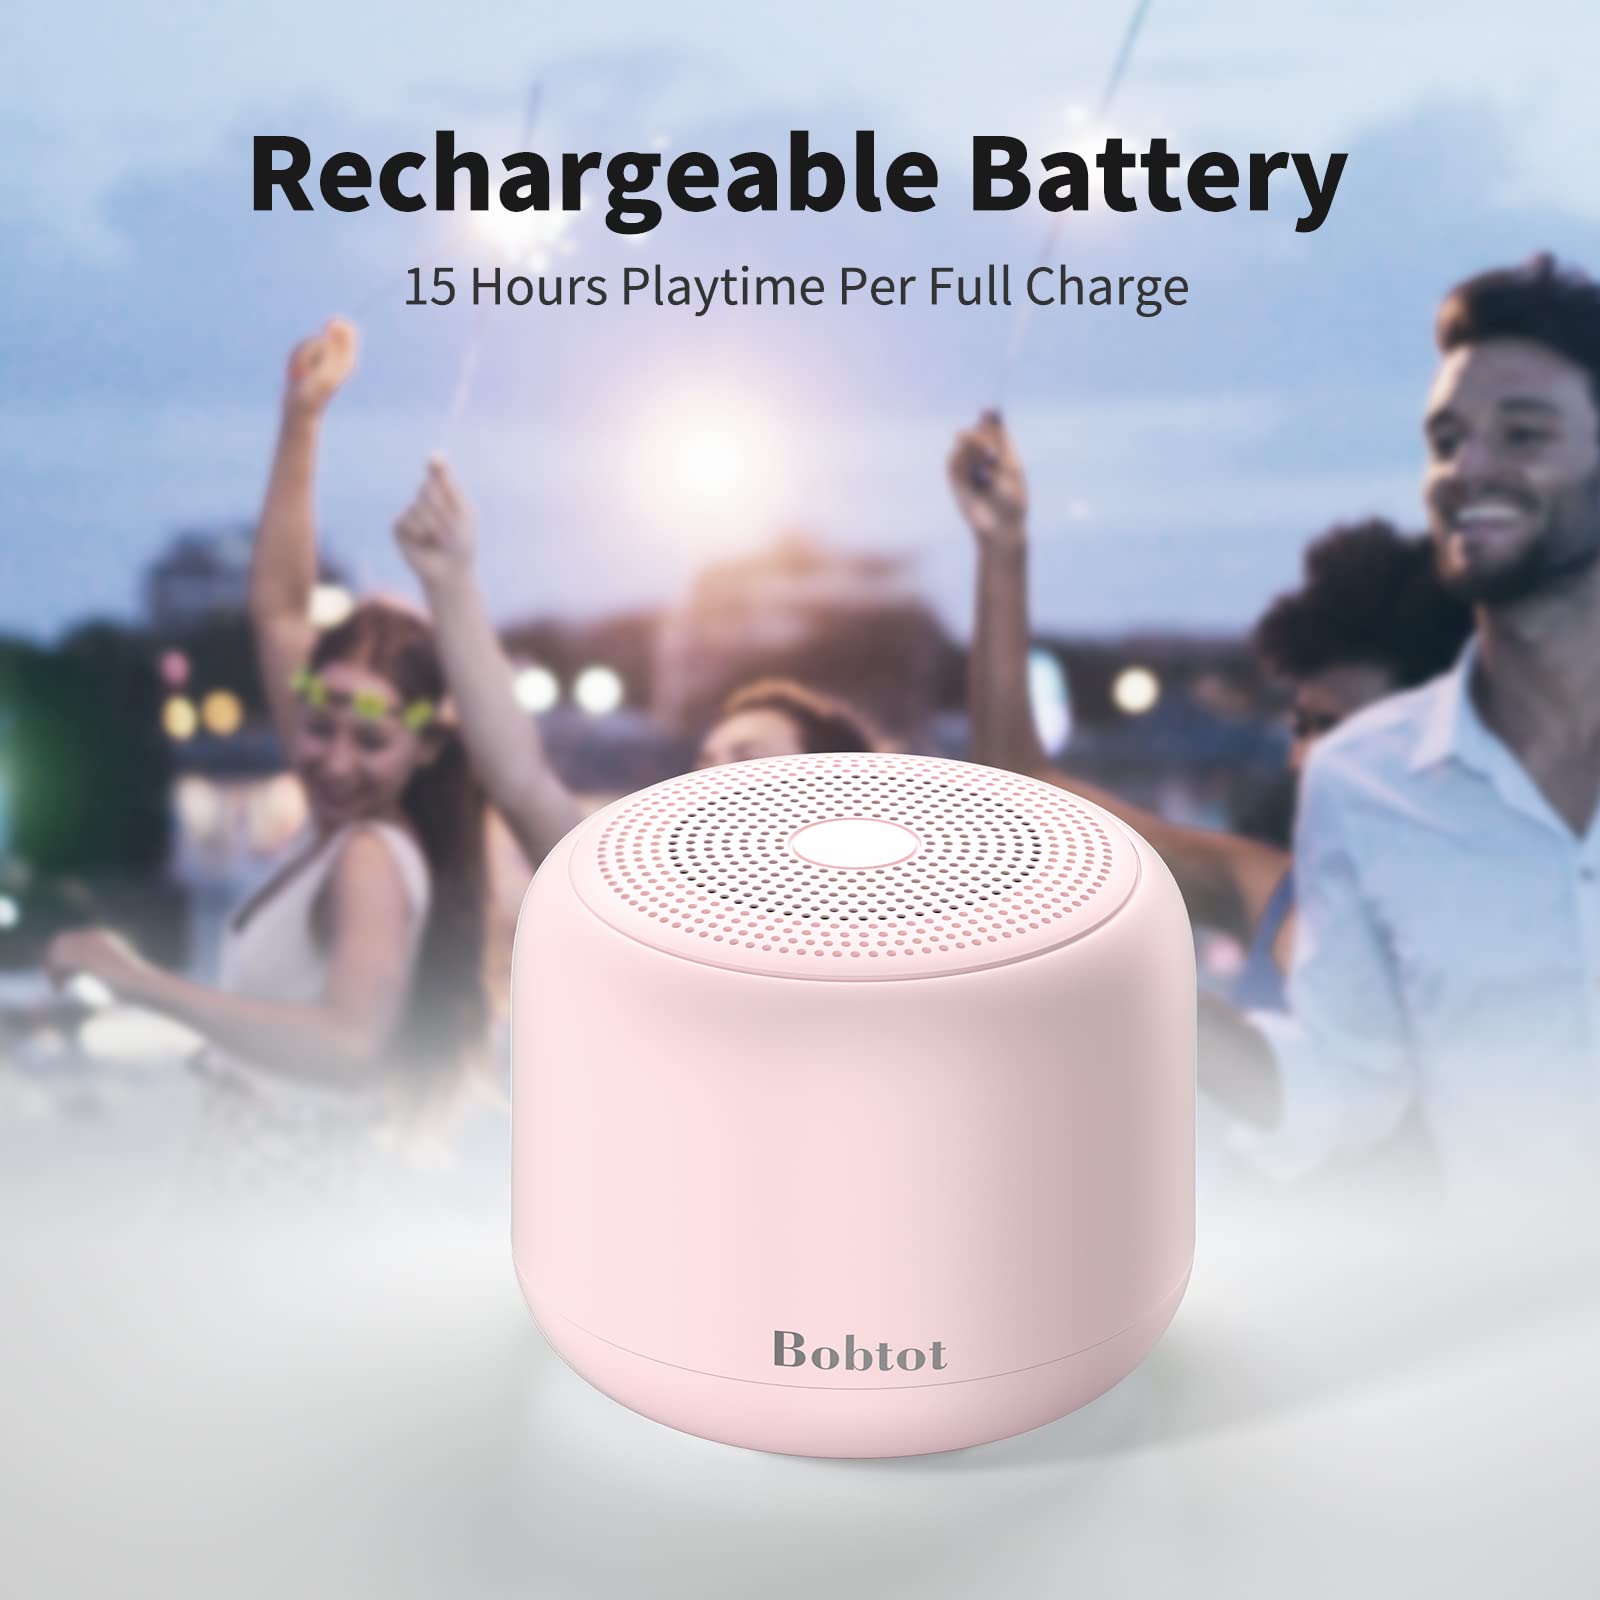 Bobtot Portable Bluetooth Speakers with Strap Easy to Carry, Wireless Waterproof Mini Speaker with Loud Stereo Sound,15 Hours Playtime, Rechargeable Battery, Built-In Microphone, Pink